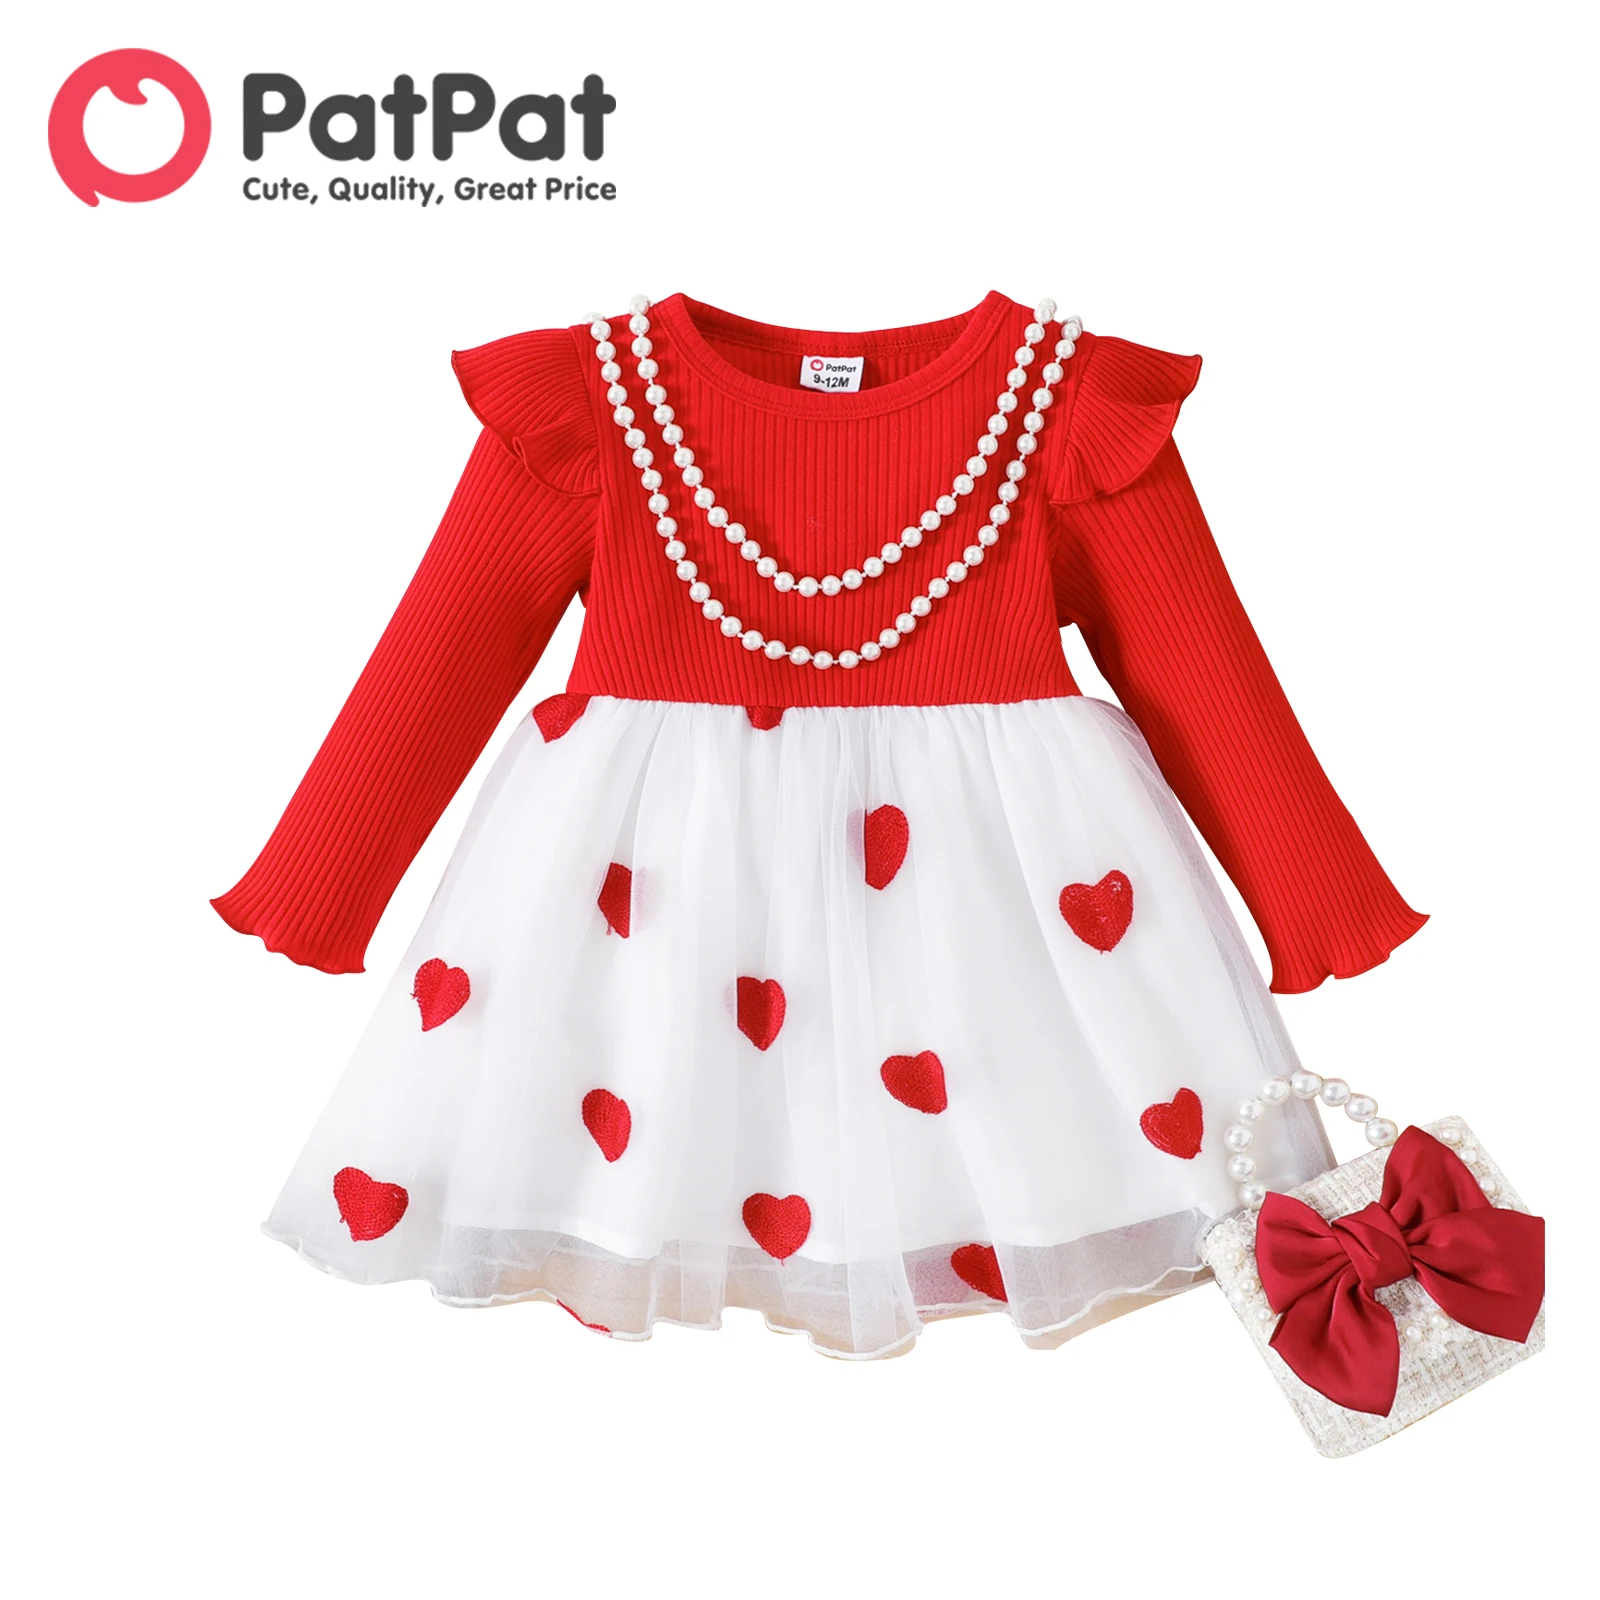 

PatPat Party Dress Newborn Baby Girl Clothes New Born Kids Solid Rib Knit Long-sleeve Spliced Heart Embroidered Mesh Dresses